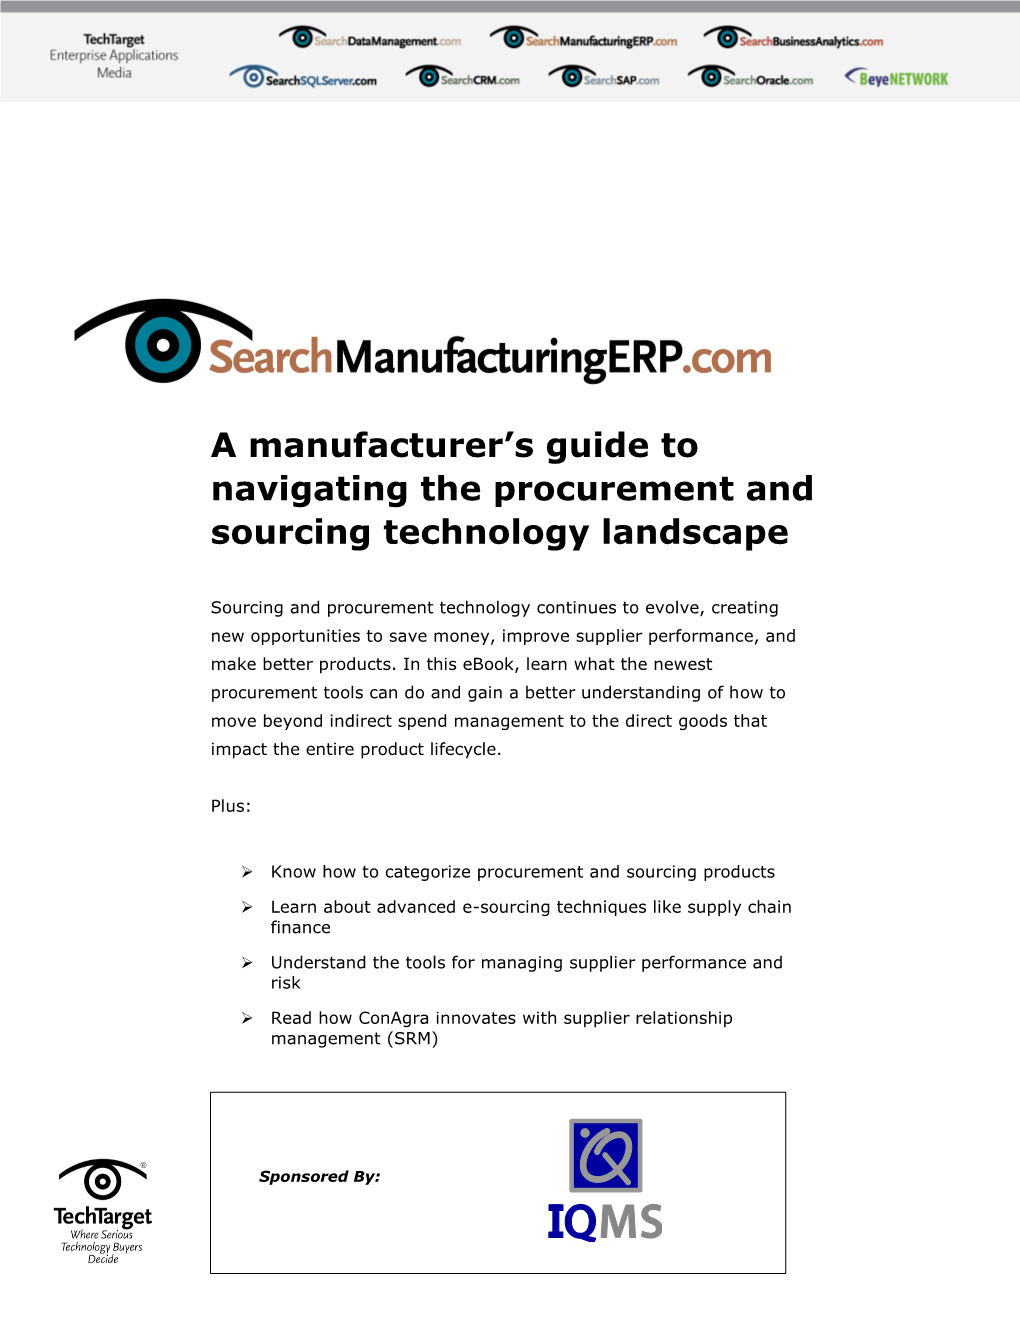 A Manufacturer's Guide to Navigating the Procurement and Sourcing